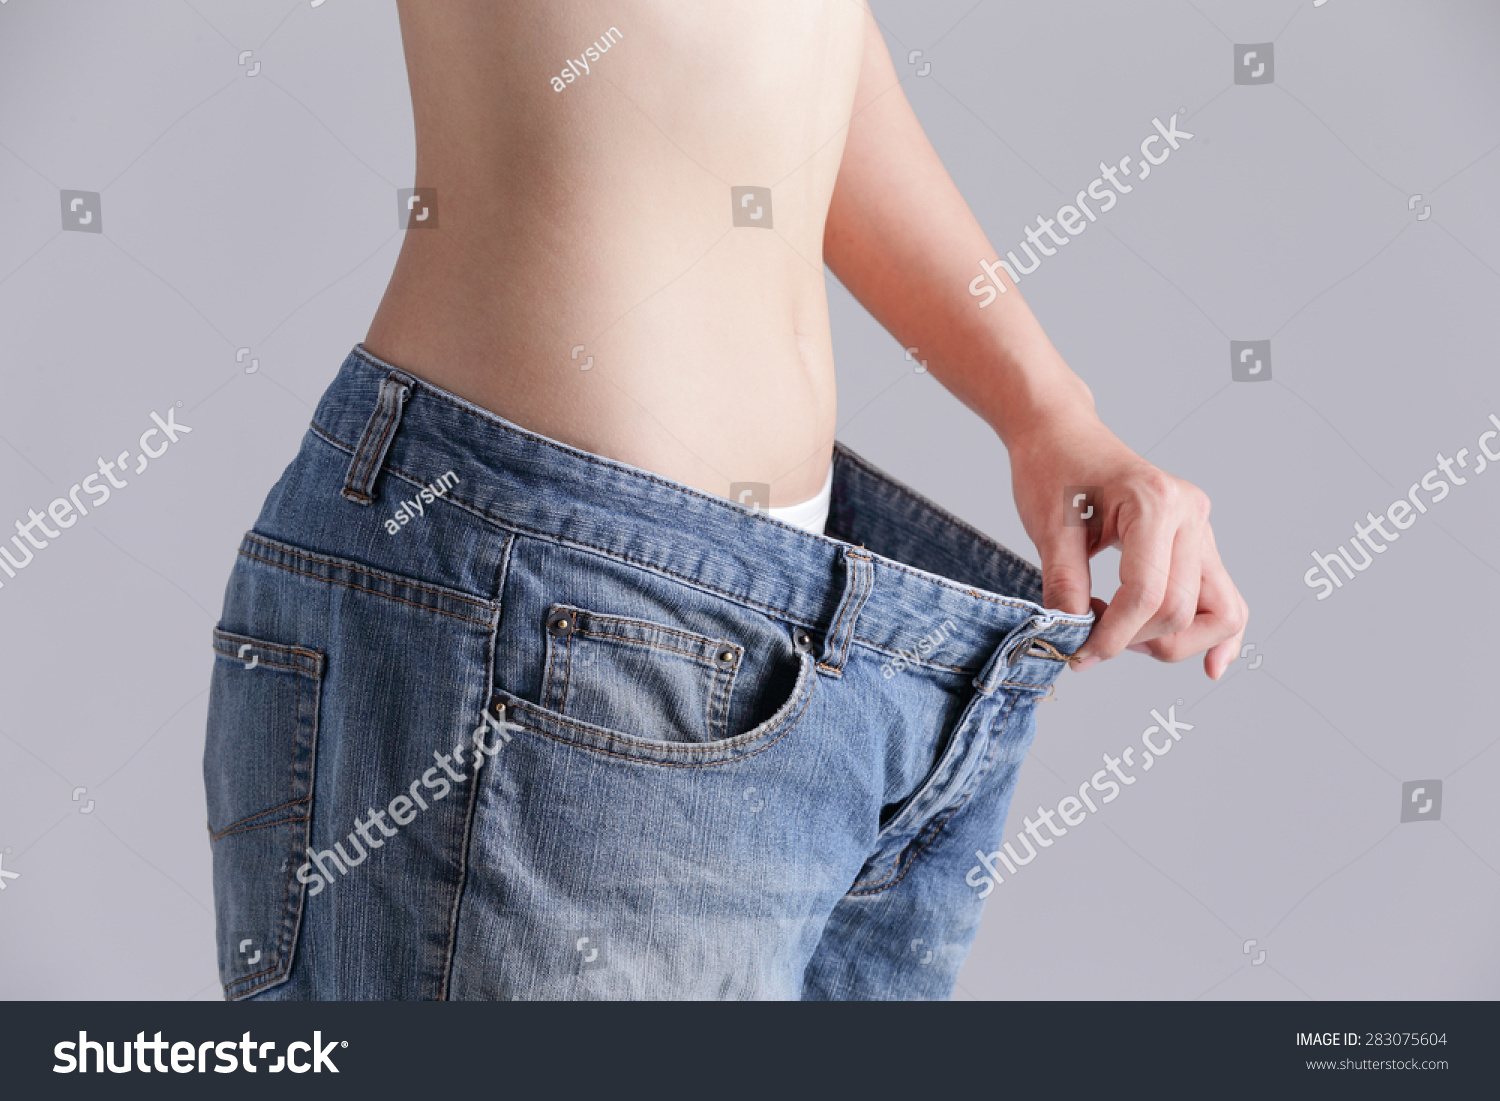 Woman Shows Weight Loss By Wearing Stock Photo 283075604 Shutterstock